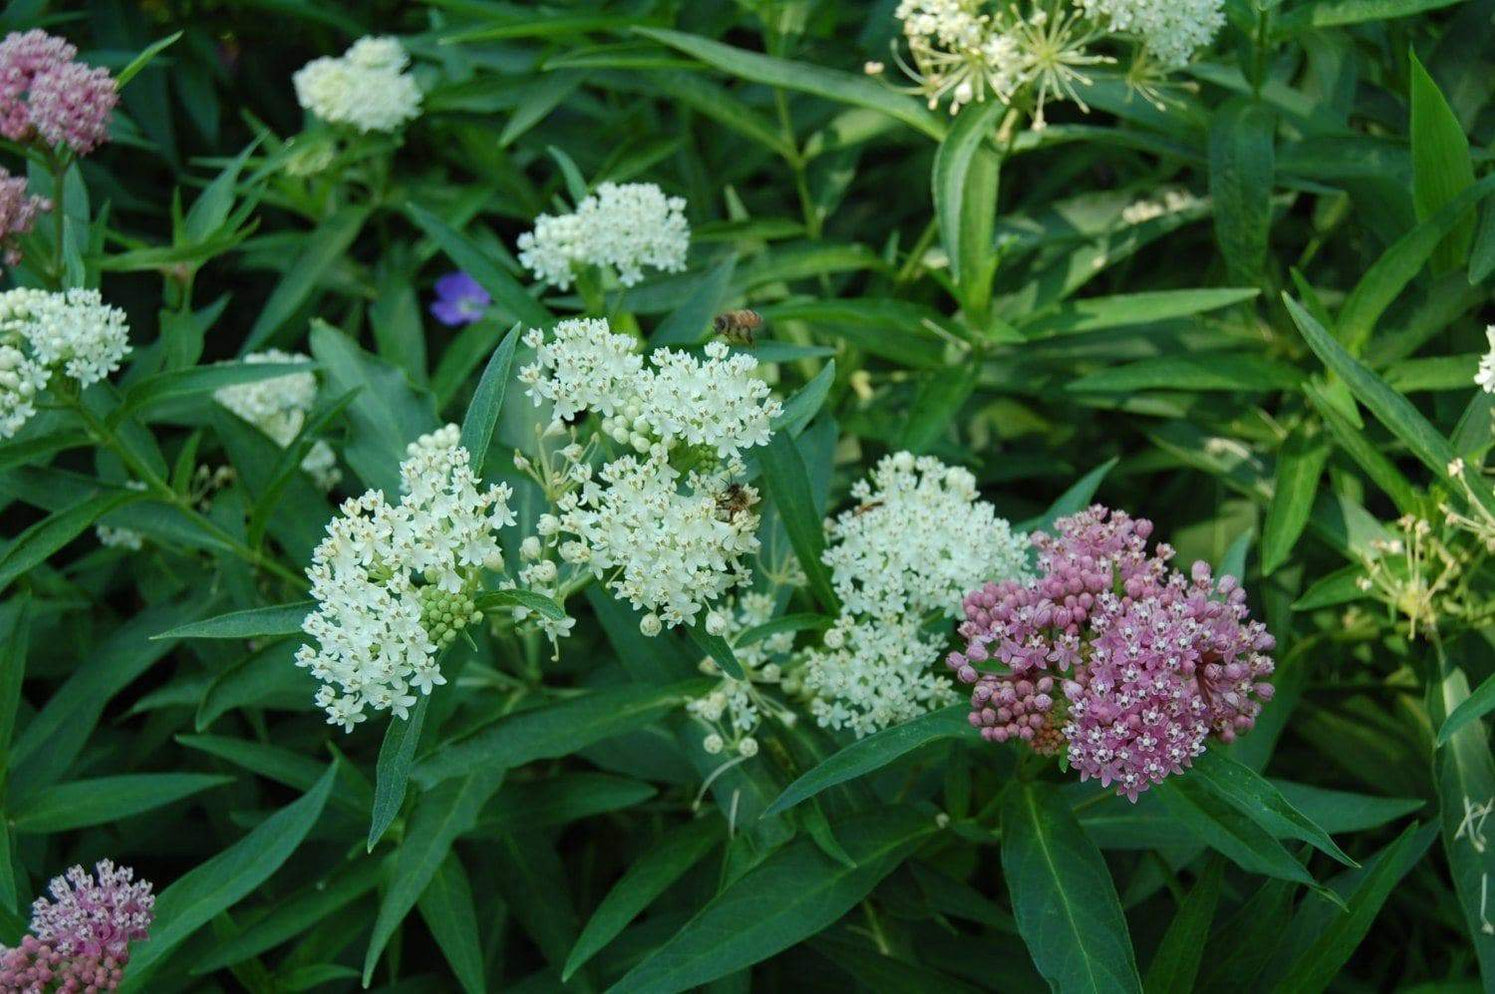 Butterfly Weed Seeds-White Milkweed (Asclepias incarnata) attract bees ...